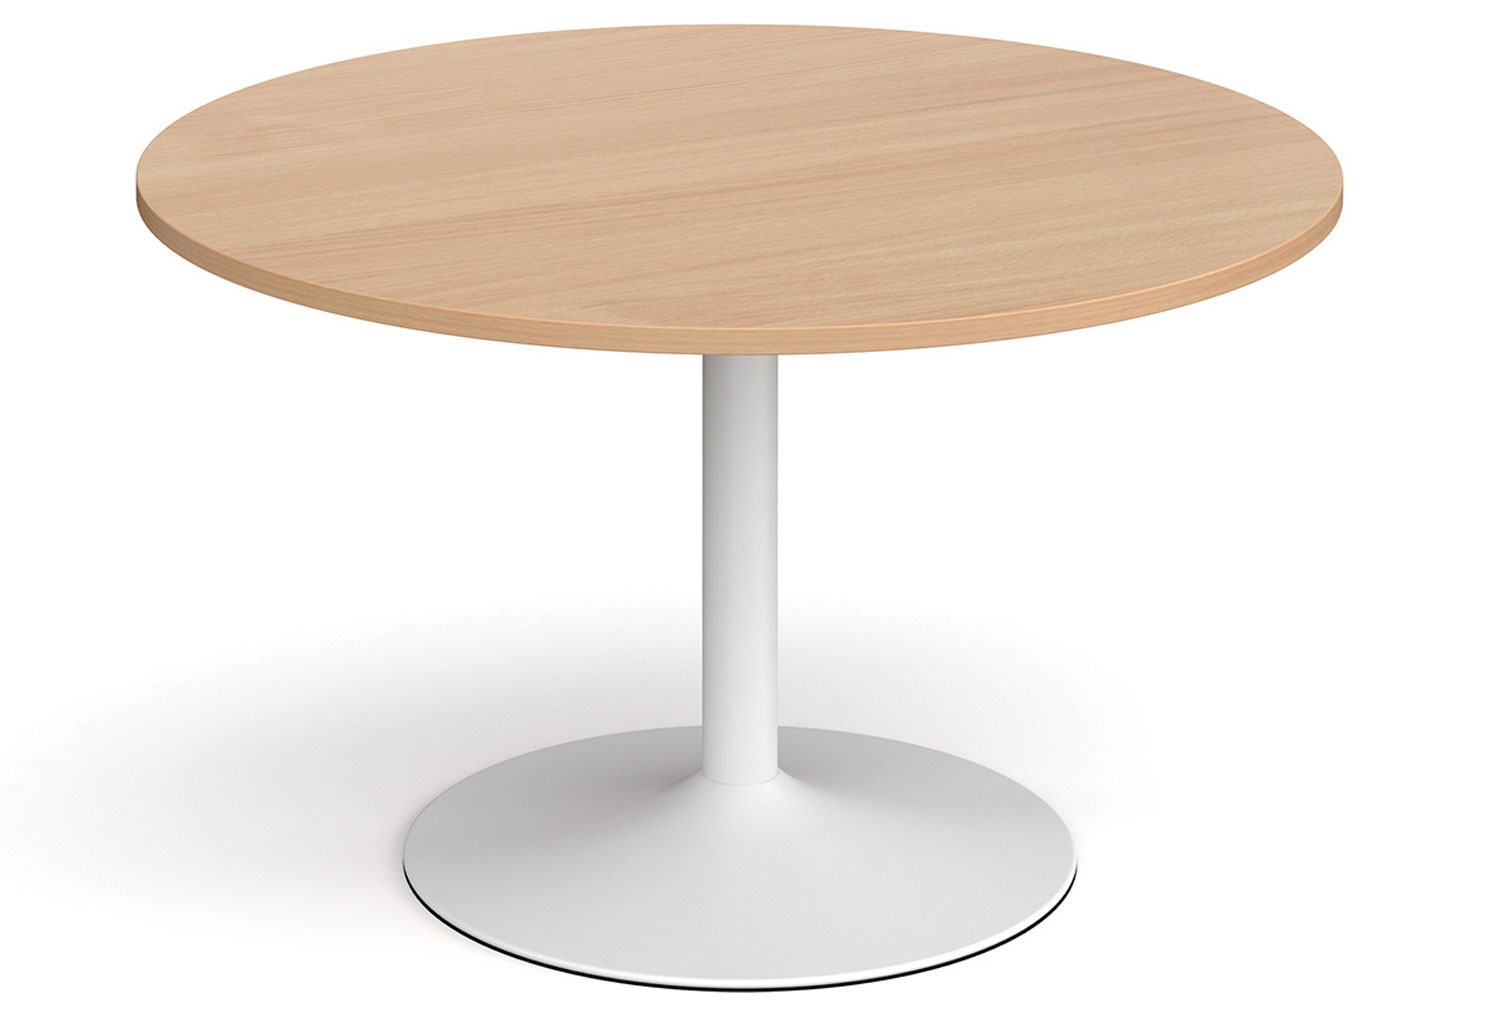 All Beech Trumpet Base Round Boardroom Table, 120diax73h (cm), Fully Installed